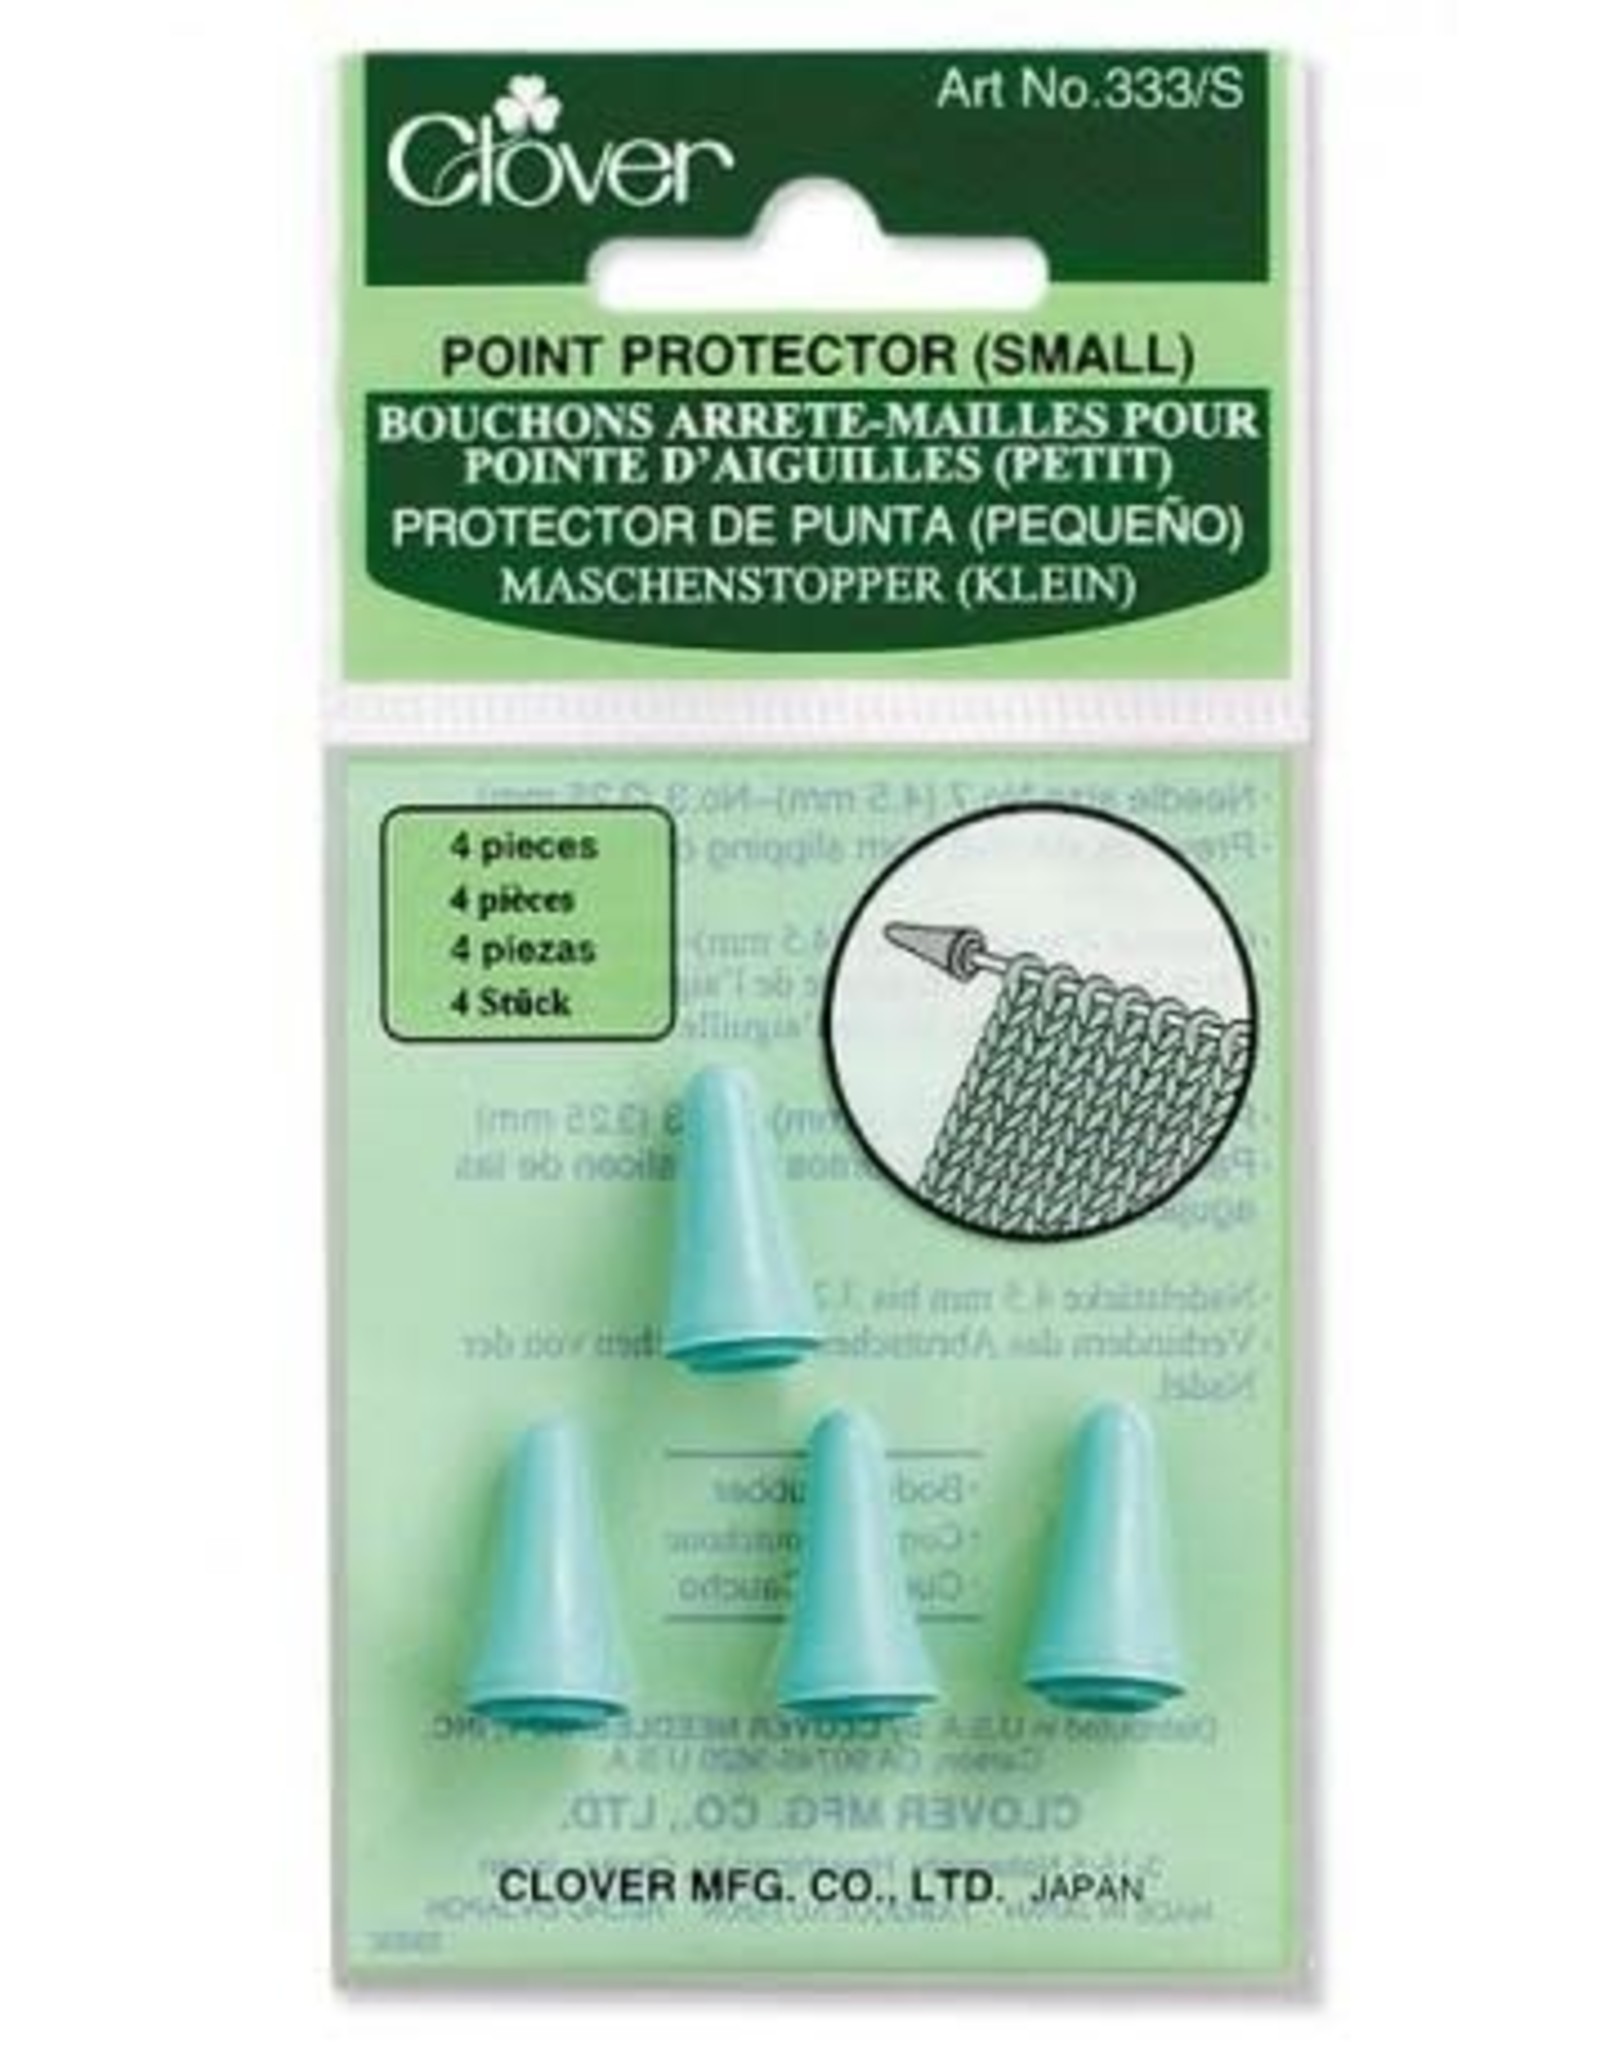 Clover Clover 333/S Point Protector small